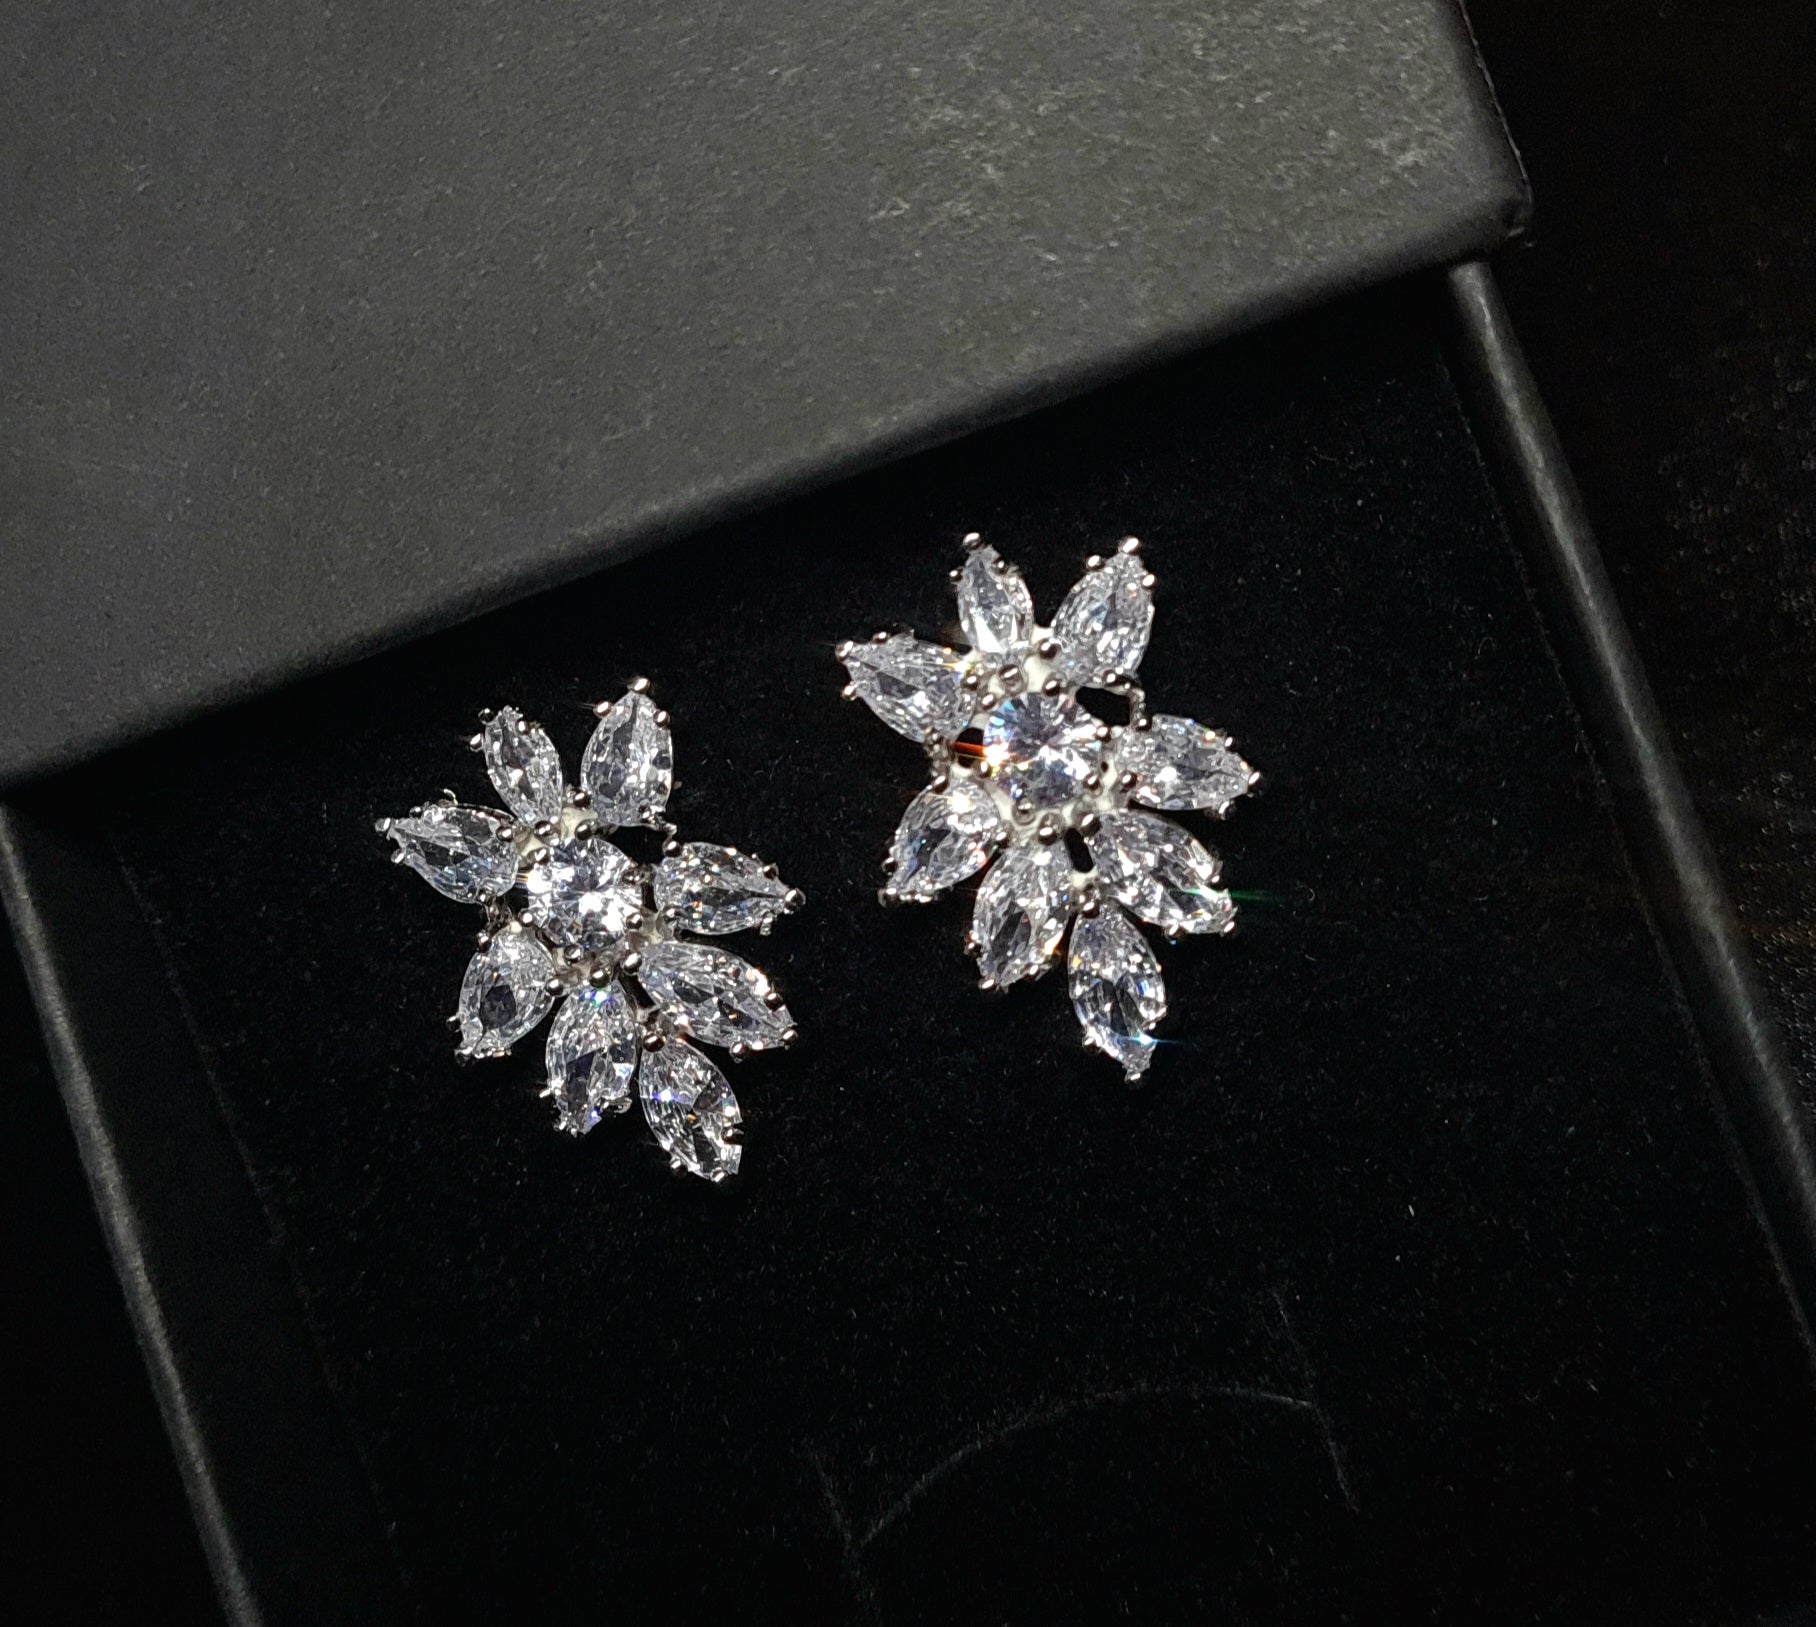 A pair of earrings in the shape of a flower, made from cubic zirconia stones. The earrings are sitting on a black surface. The flower is about 2.6 cm and is made up of petals that are clear and sparkling. The center of the flower is a large cubic zirconia stone.